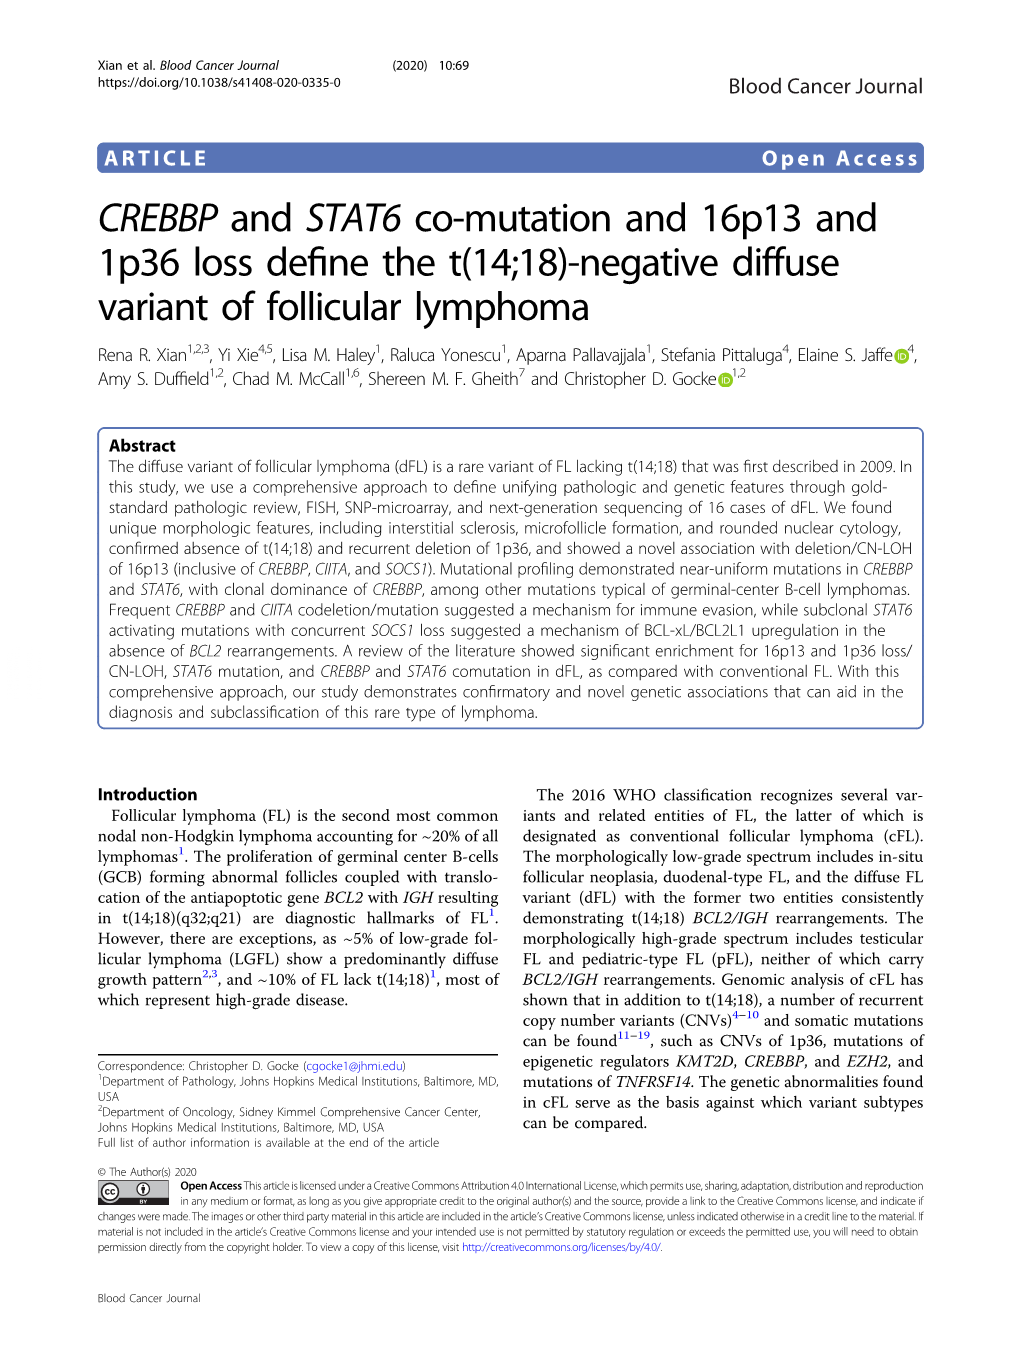 CREBBP and STAT6 Co-Mutation and 16P13 and 1P36 Loss Deﬁne the T(14;18)-Negative Diffuse Variant of Follicular Lymphoma Rena R